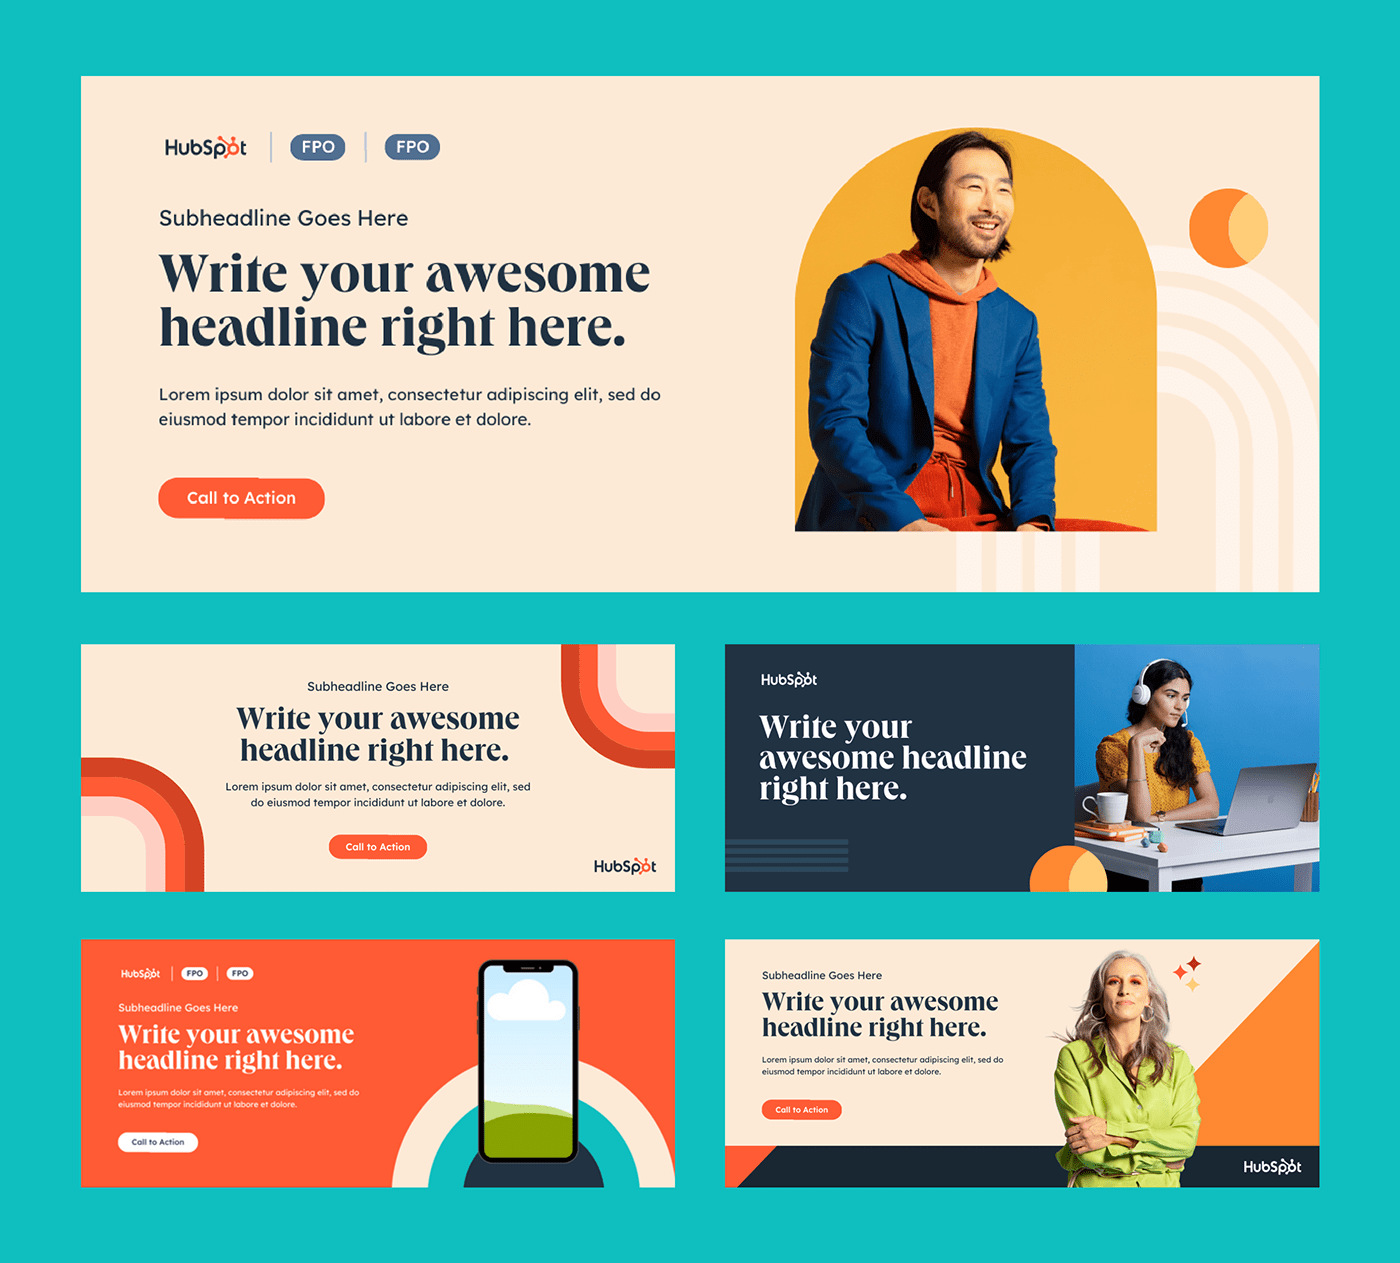 canva Canva Templates Corporate Identity digital ads email newsletter design geometric pattern hubspot Podcast cover Social Media Ads Design social media layouts